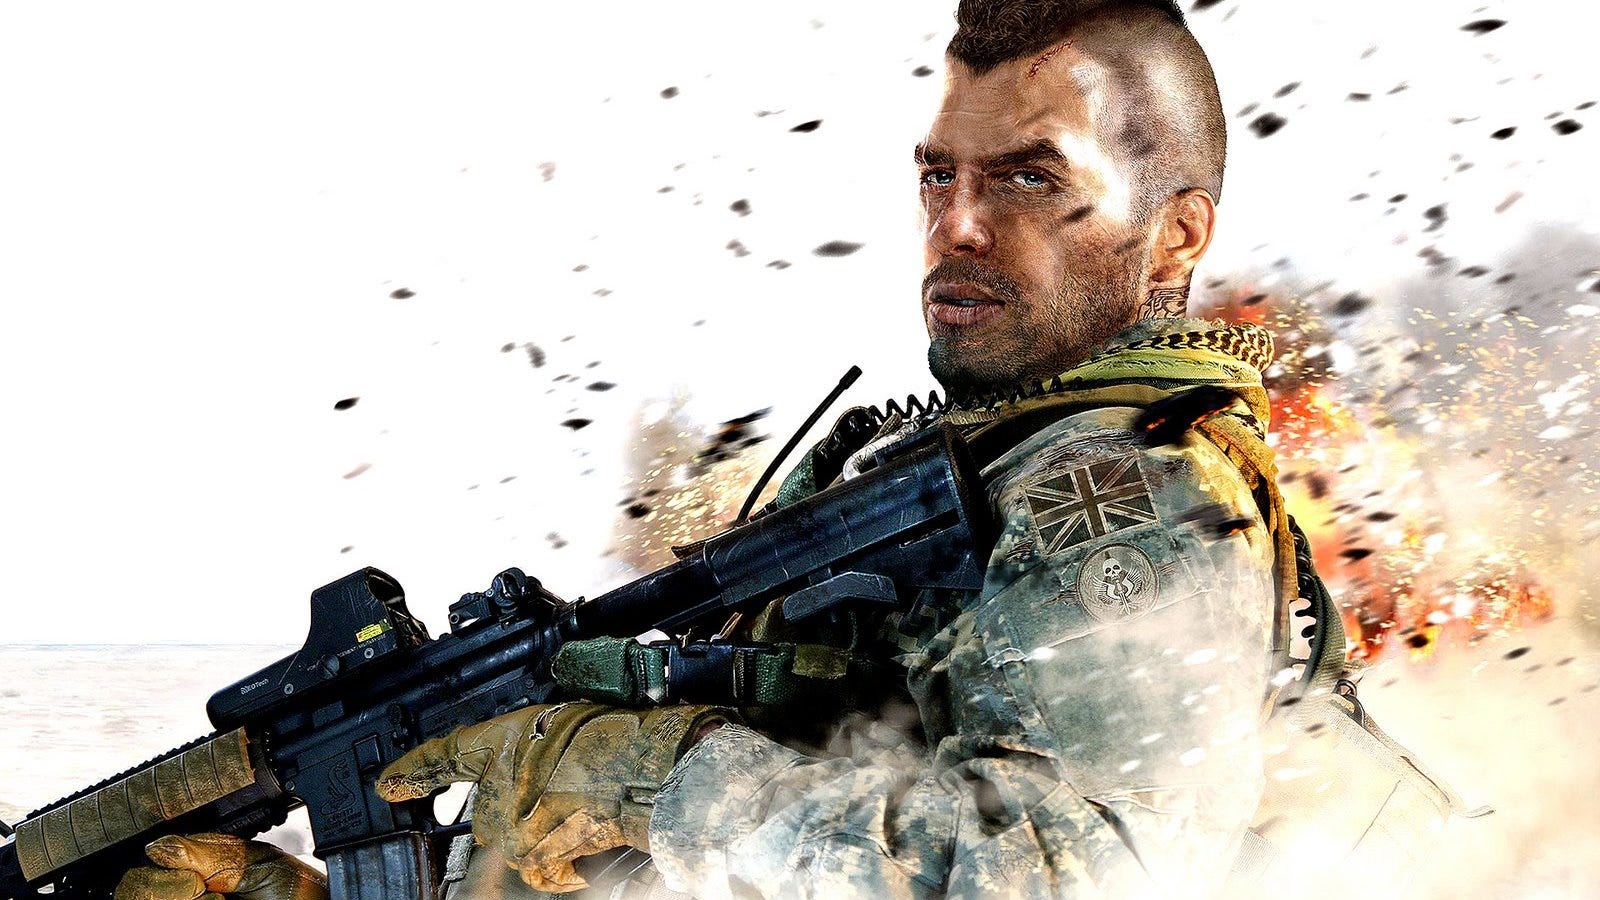 Call of Duty Modern Warfare 3 Shatters All Sales Records, Nears Half a